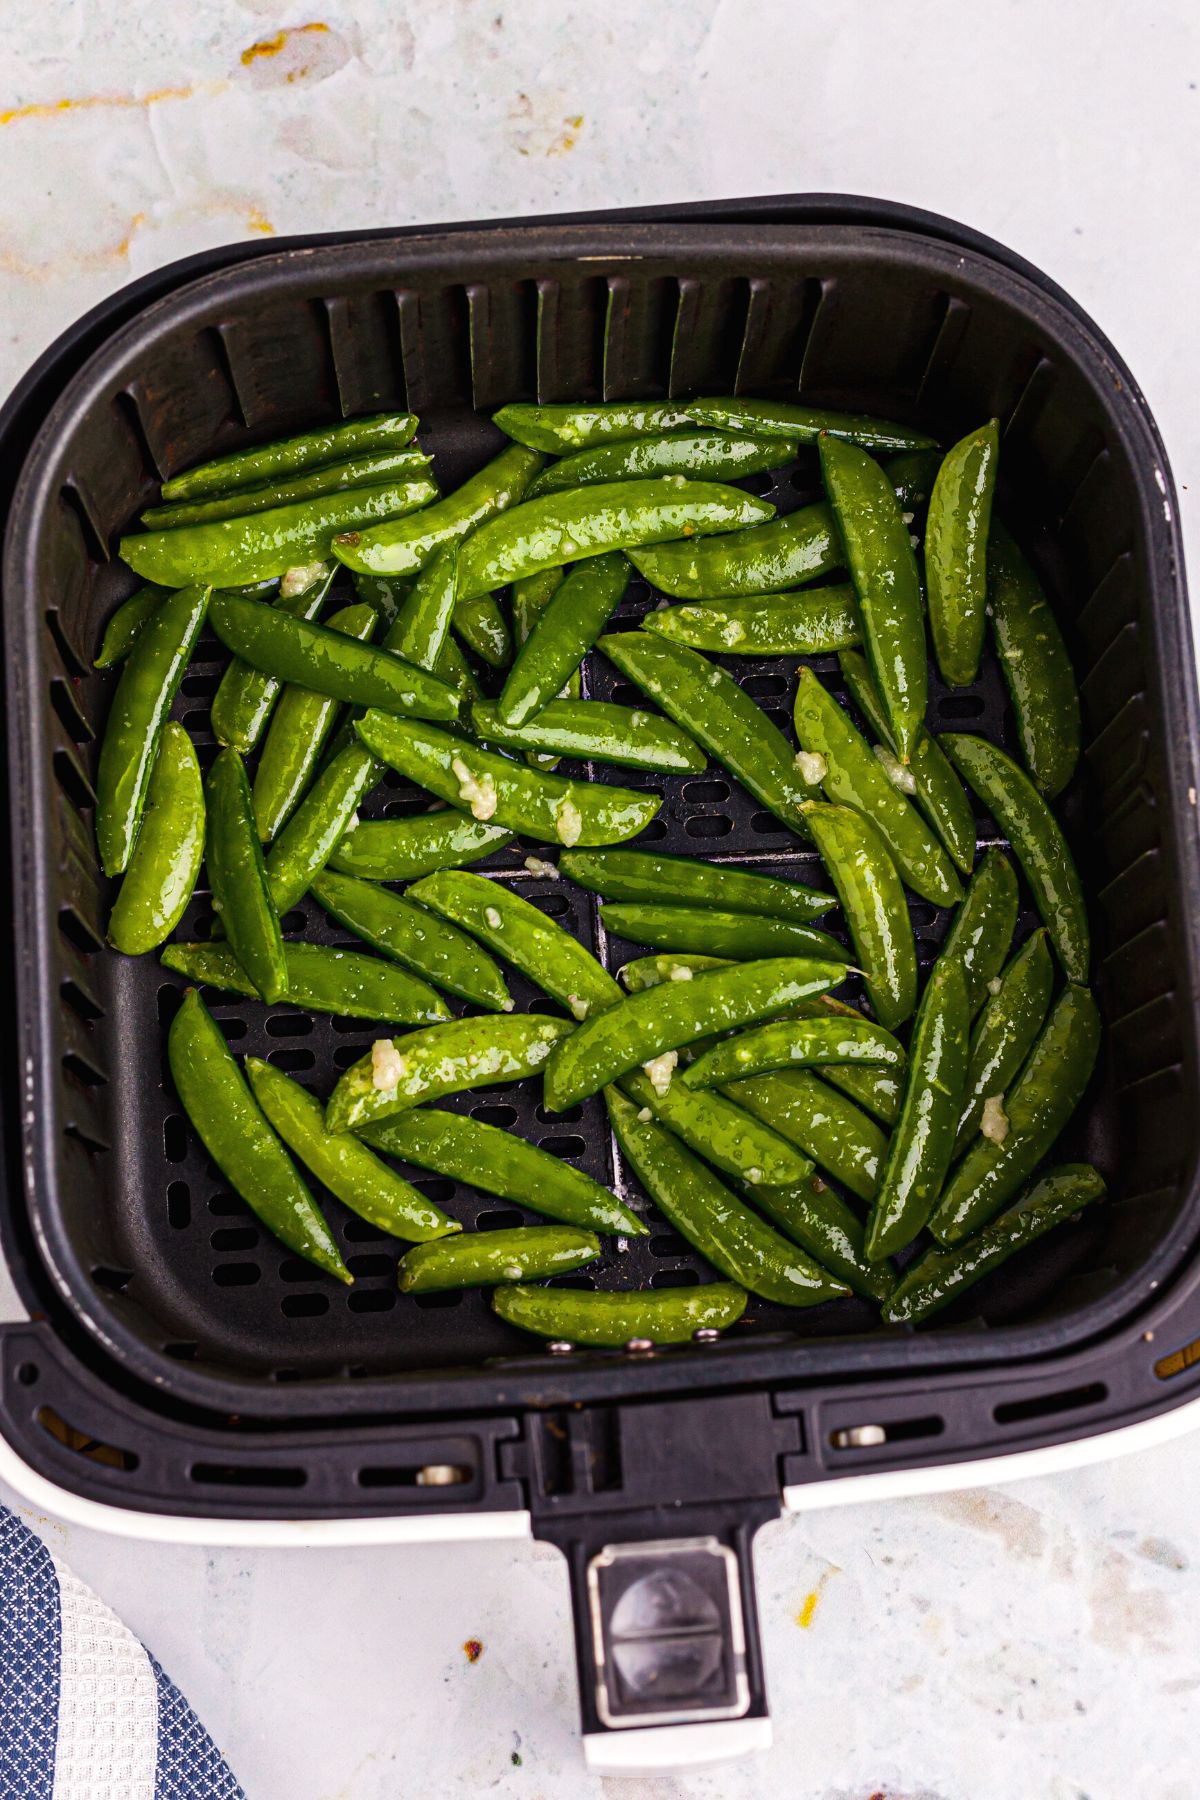 Green Snap peas tossed with olive oil in the air fryer basket before being cooked